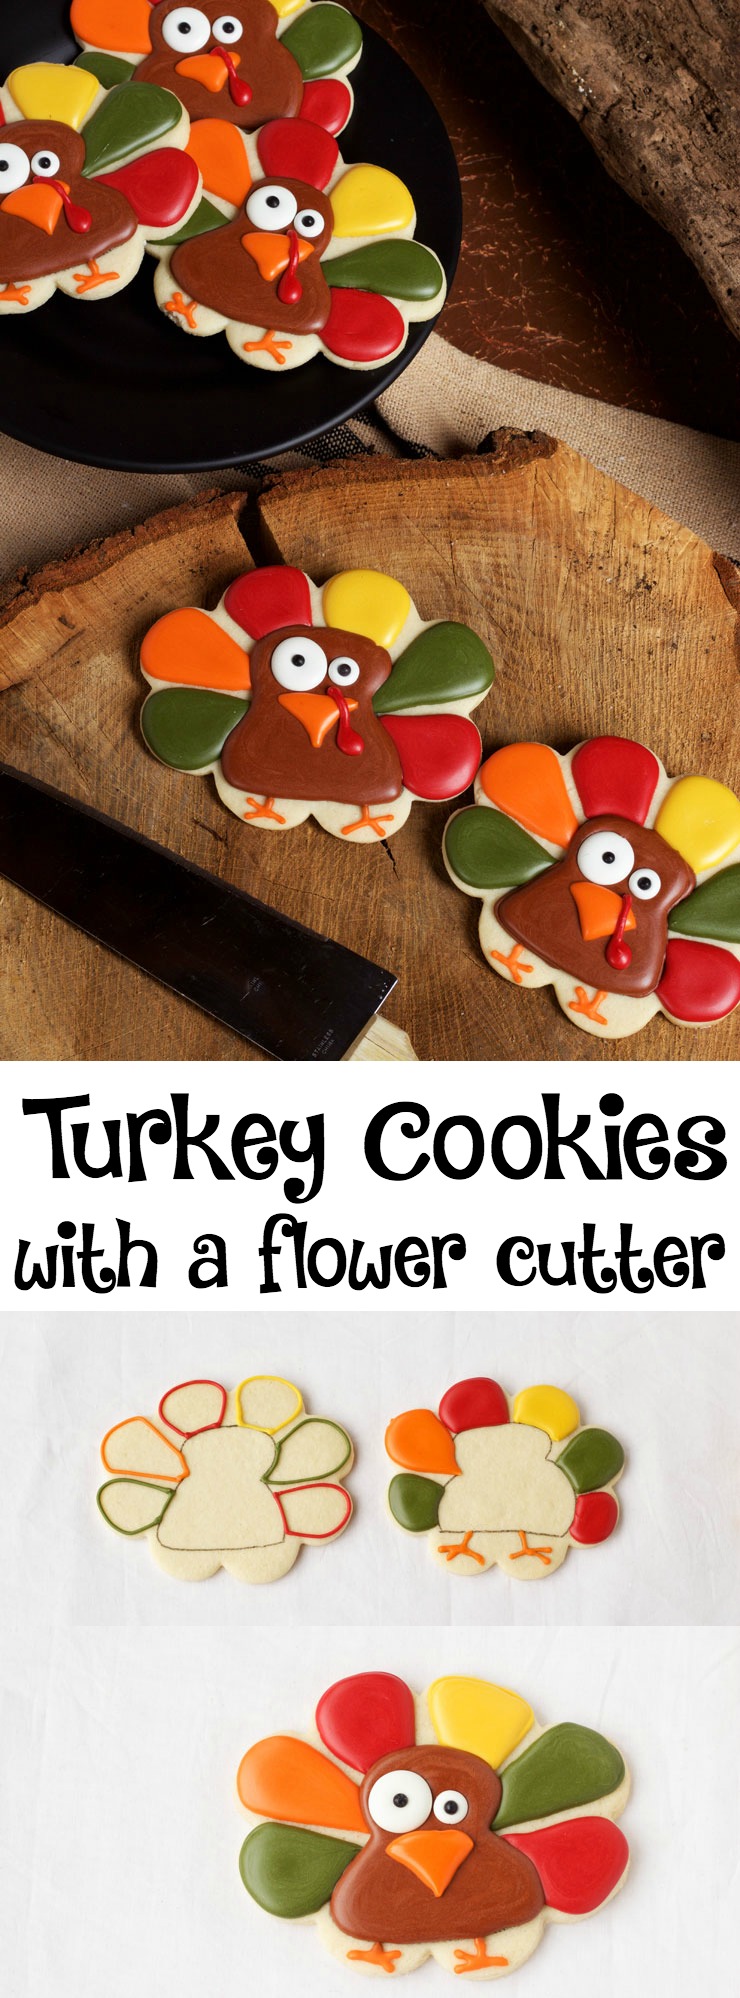 Super Simple Turkey Cookies made with a Flower Cookie Cutter | The Bearfoot Baker